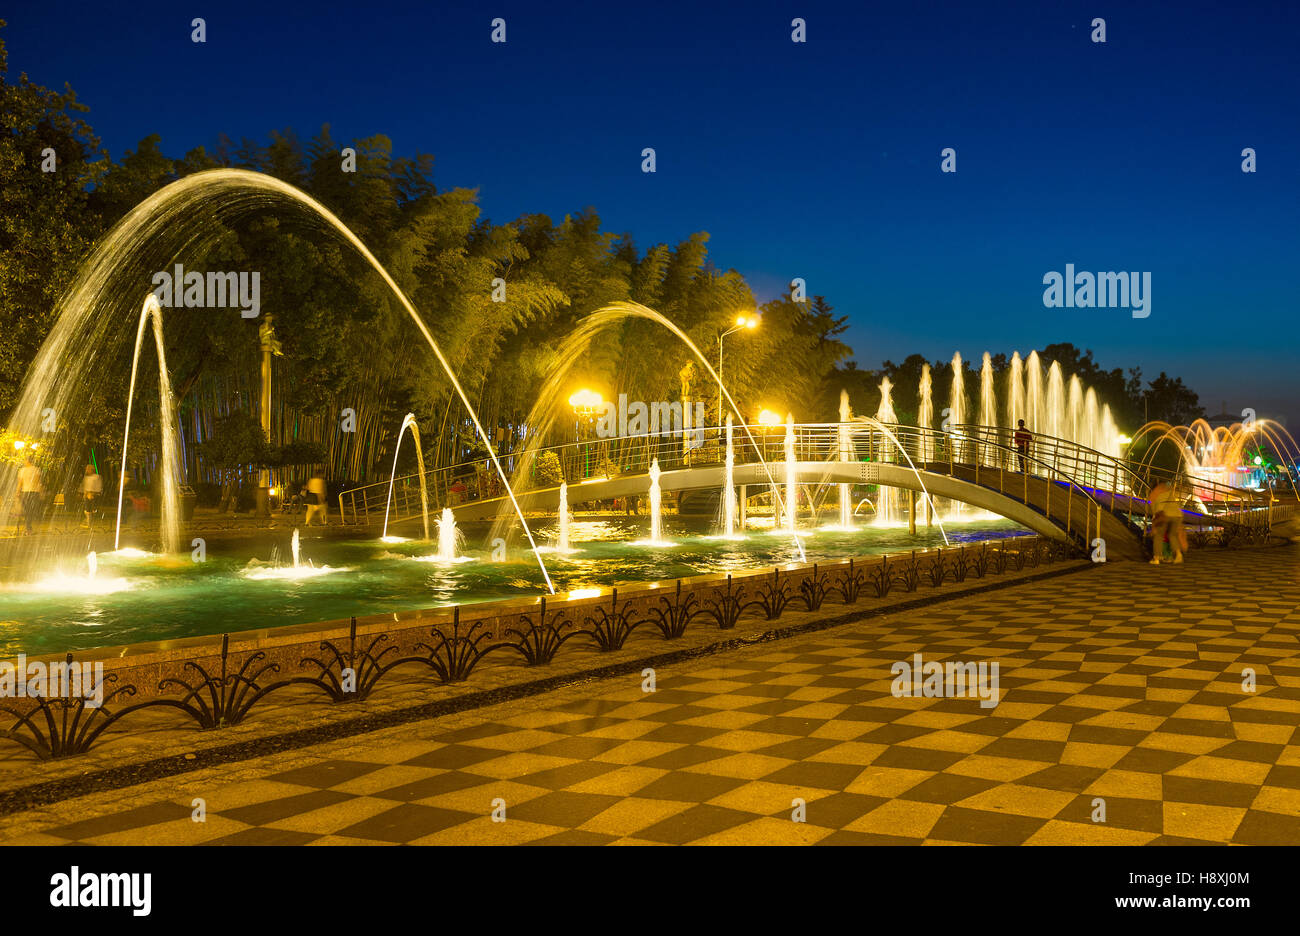 The springs of water dances in thebright lights during the evening show in the Seaside park of Batumi, Georgia. Stock Photo